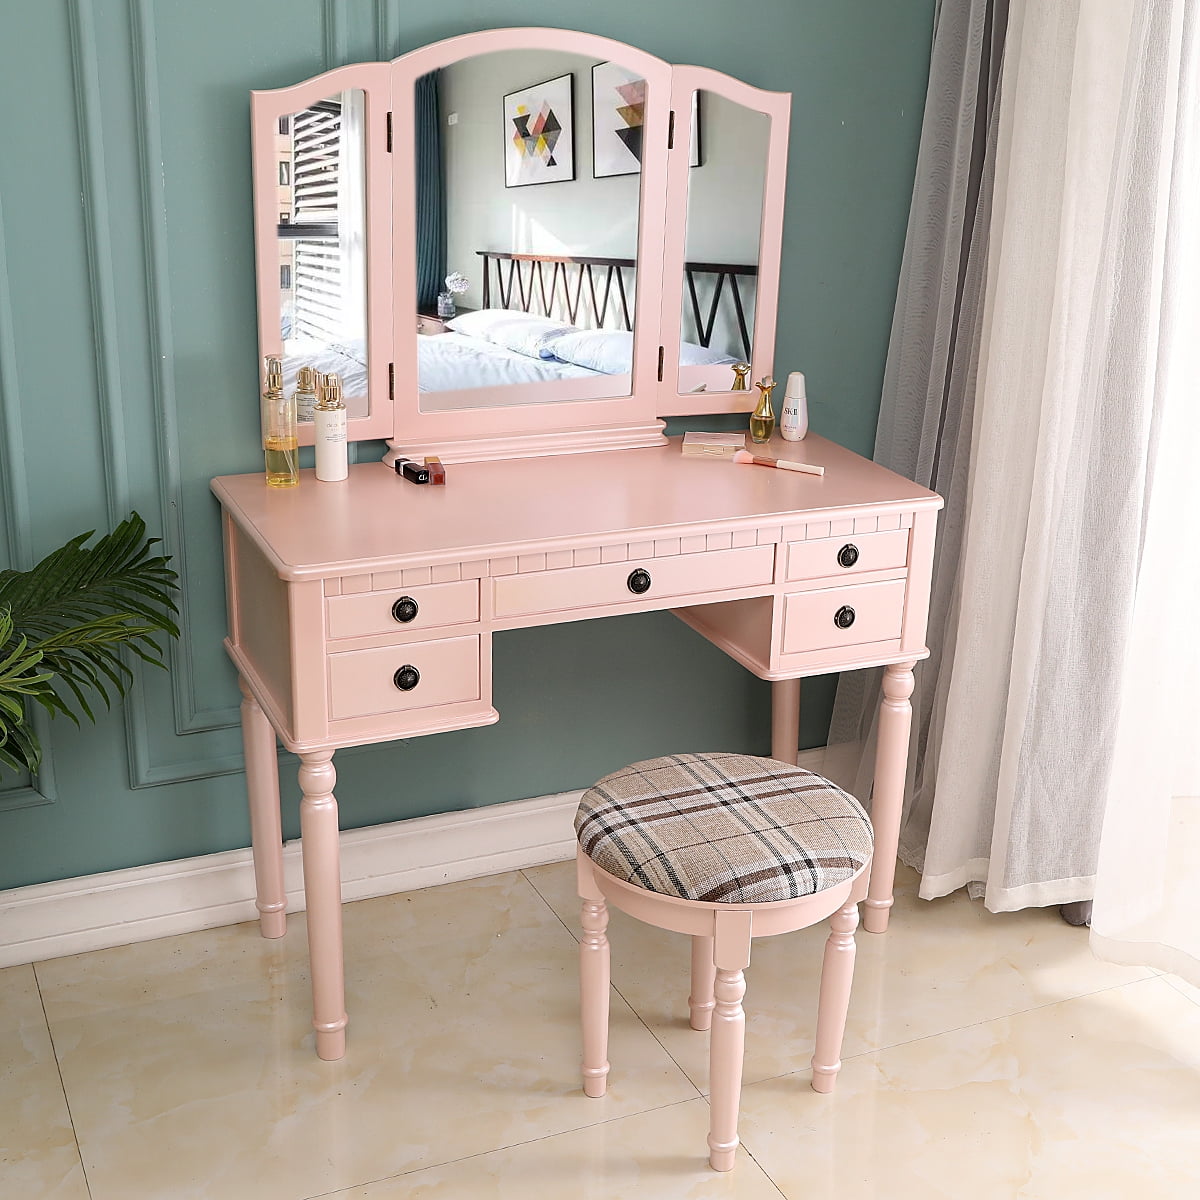 Ktaxon White/Fluorescent Pink Wooden Vanity with Cushioned